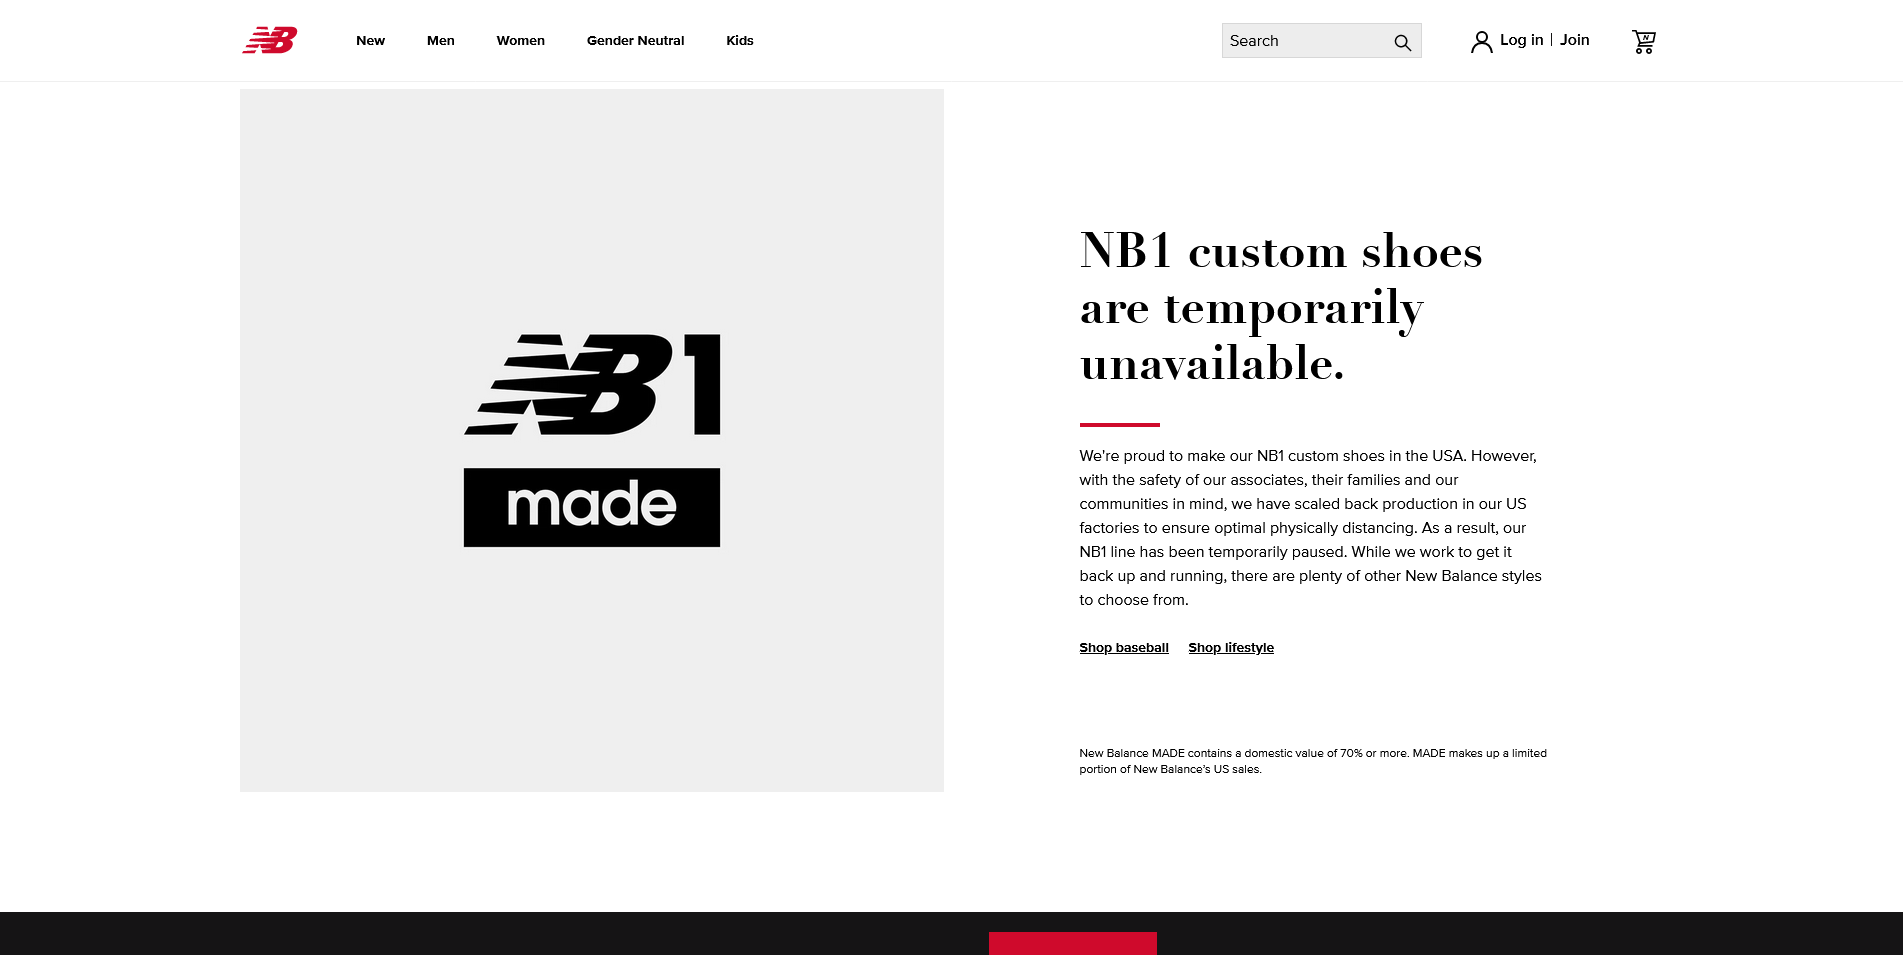 NB1 custom shoes are temporarily unavailable